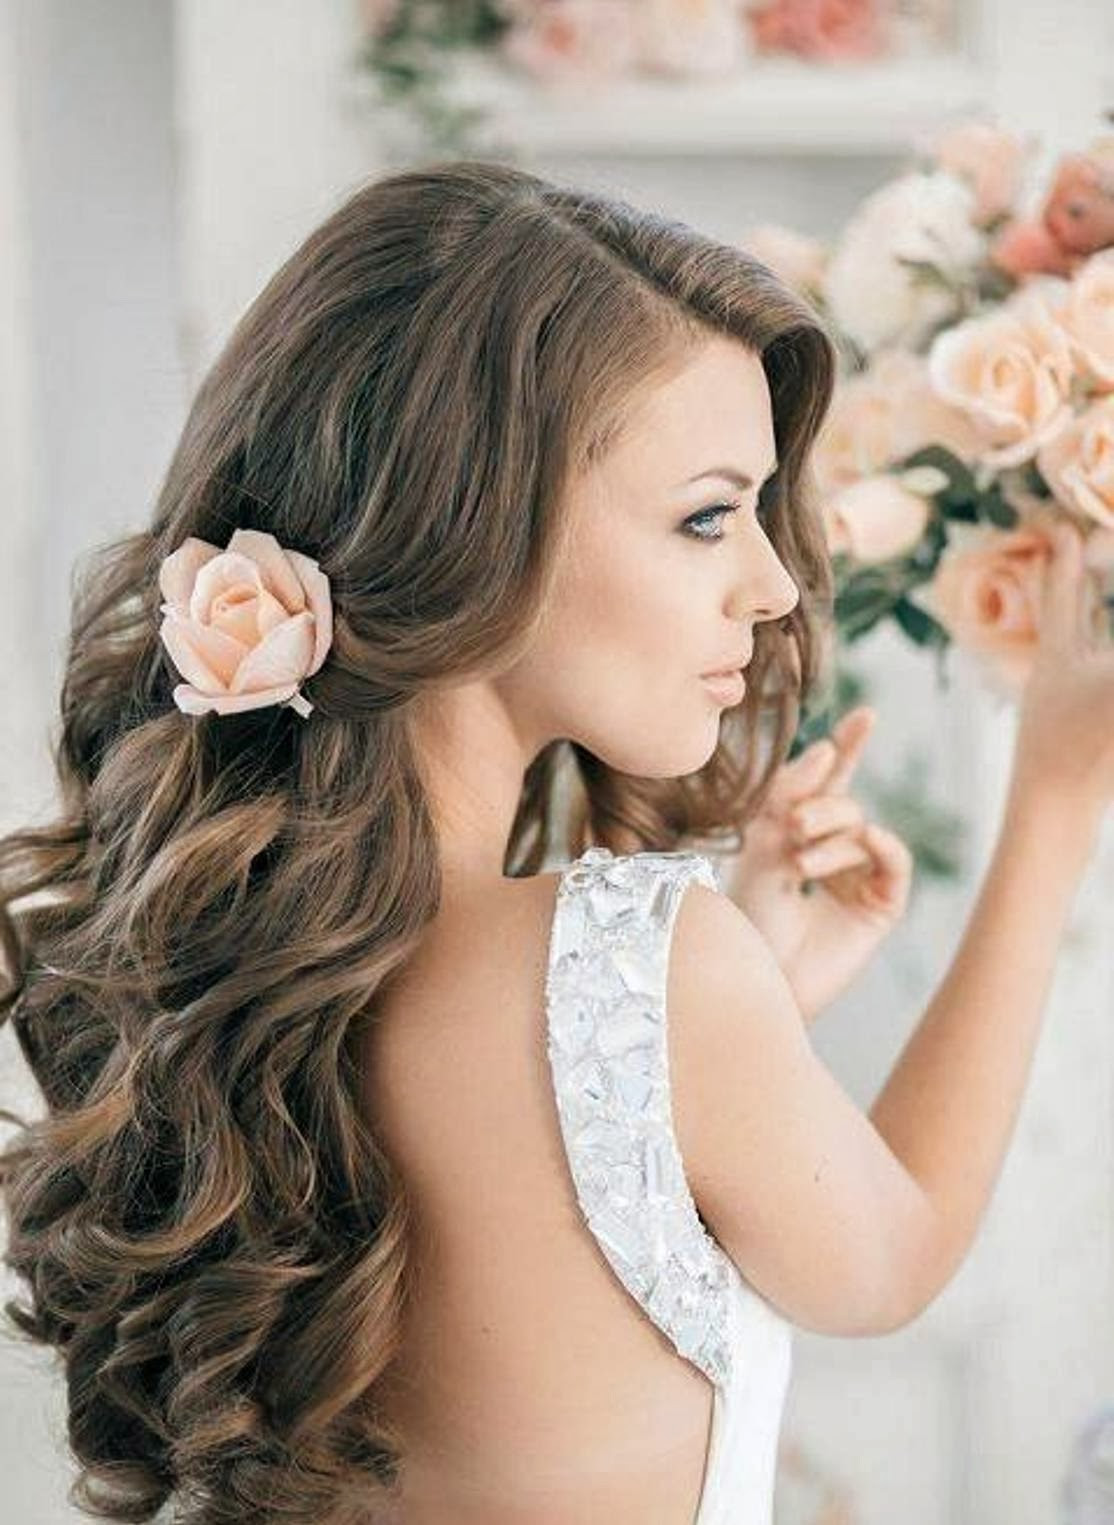 Bridesmaid Hairstyles For Long Hair
 Curly hairstyles for long hair women Hair Fashion Style